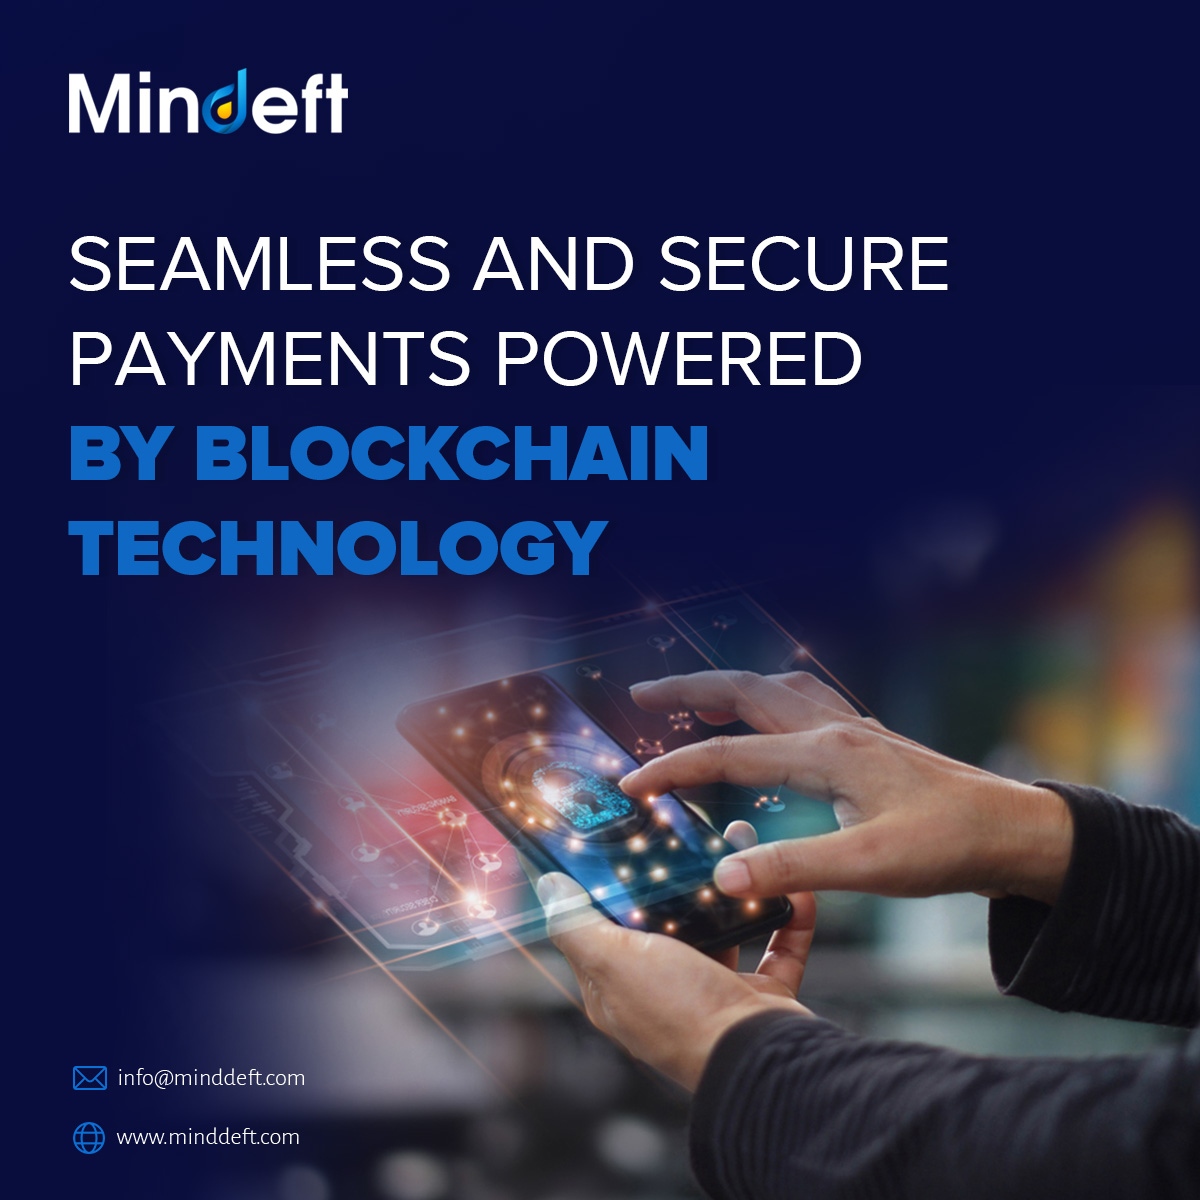 Say goodbye to traditional payment systems. Explore our blockchain-powered payment solutions at MindDeft.com.

#Blockchain #Payments #SecureTransactions #FinancialTechnology